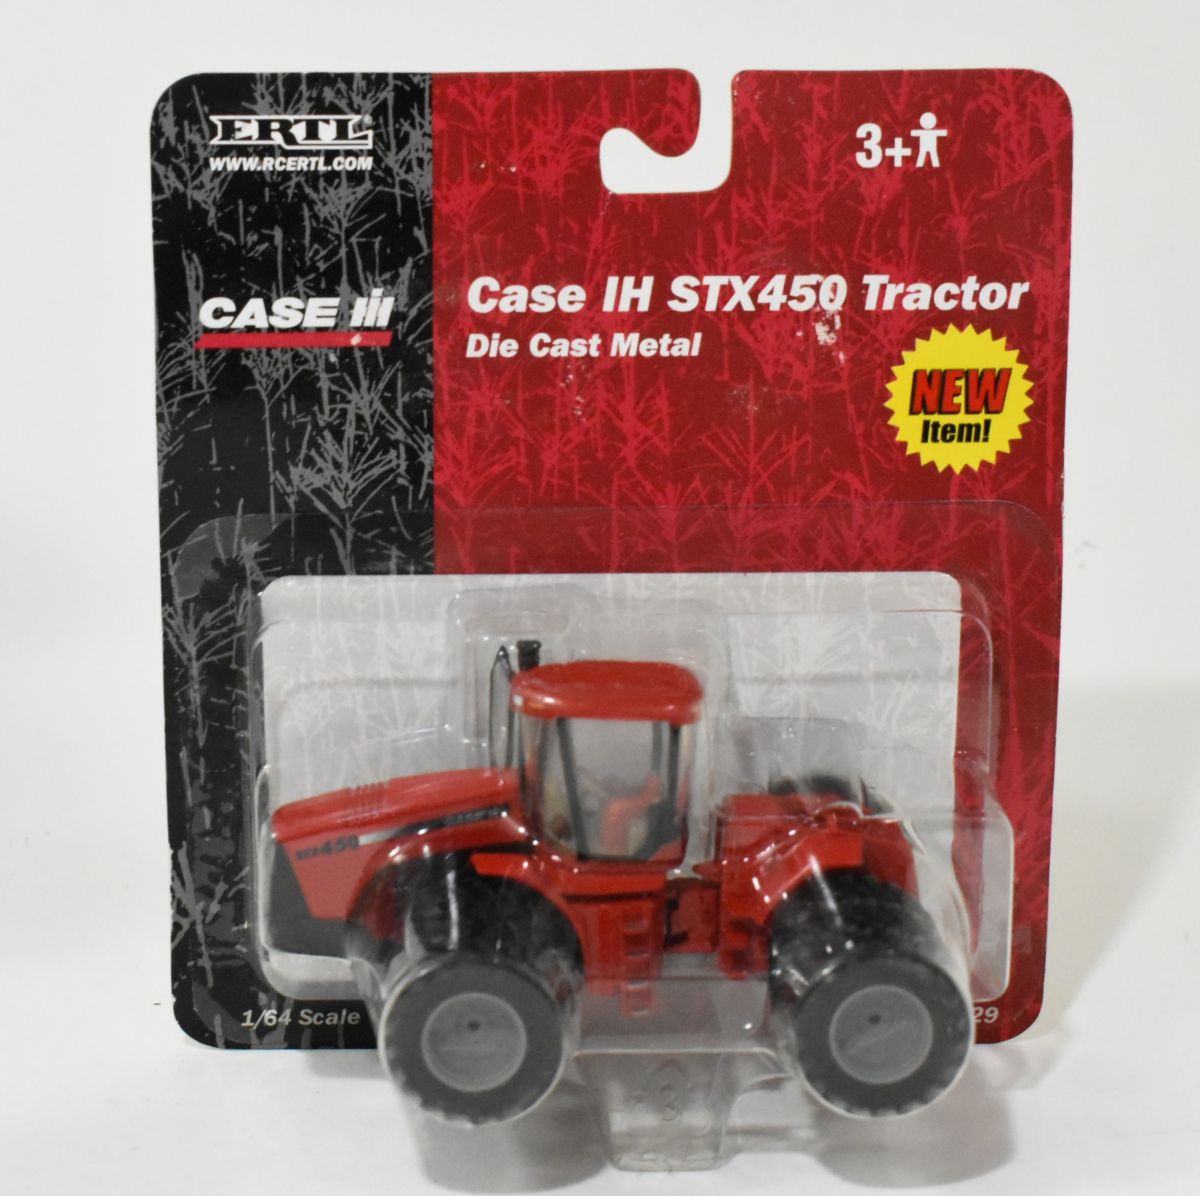 Case IH STX 450 4wd Tractor With Triples Diecast Ertl Precision Series 2 for sale online 